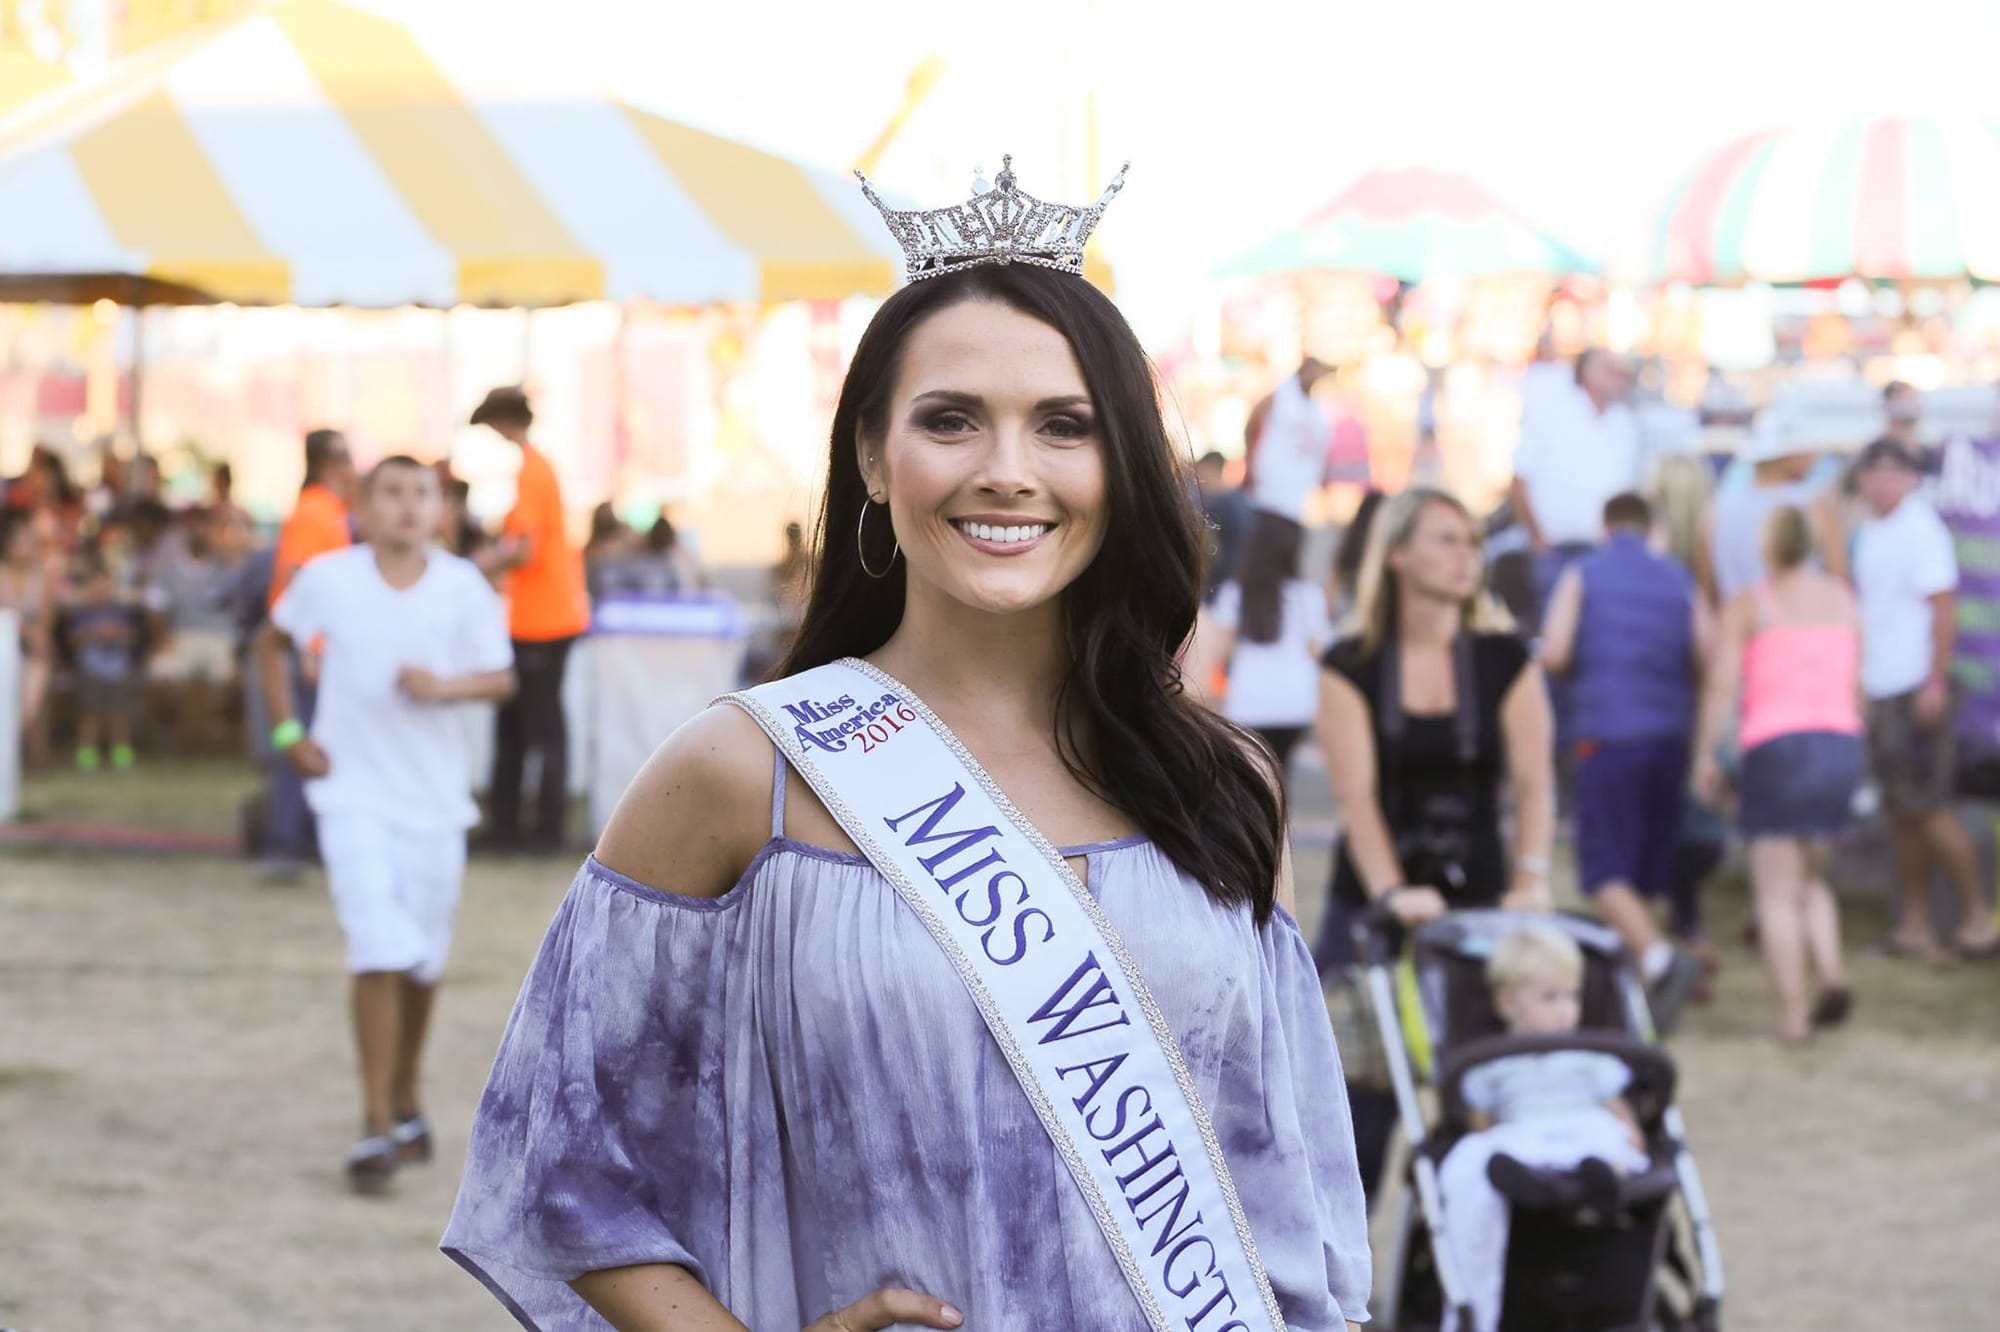 Felida native Alicia Cooper won the title of Miss Washington 2016 in July. She visited the Clark County Fair in August. On Sunday night, she was named third runner-up in the Miss America 2017 pageant.